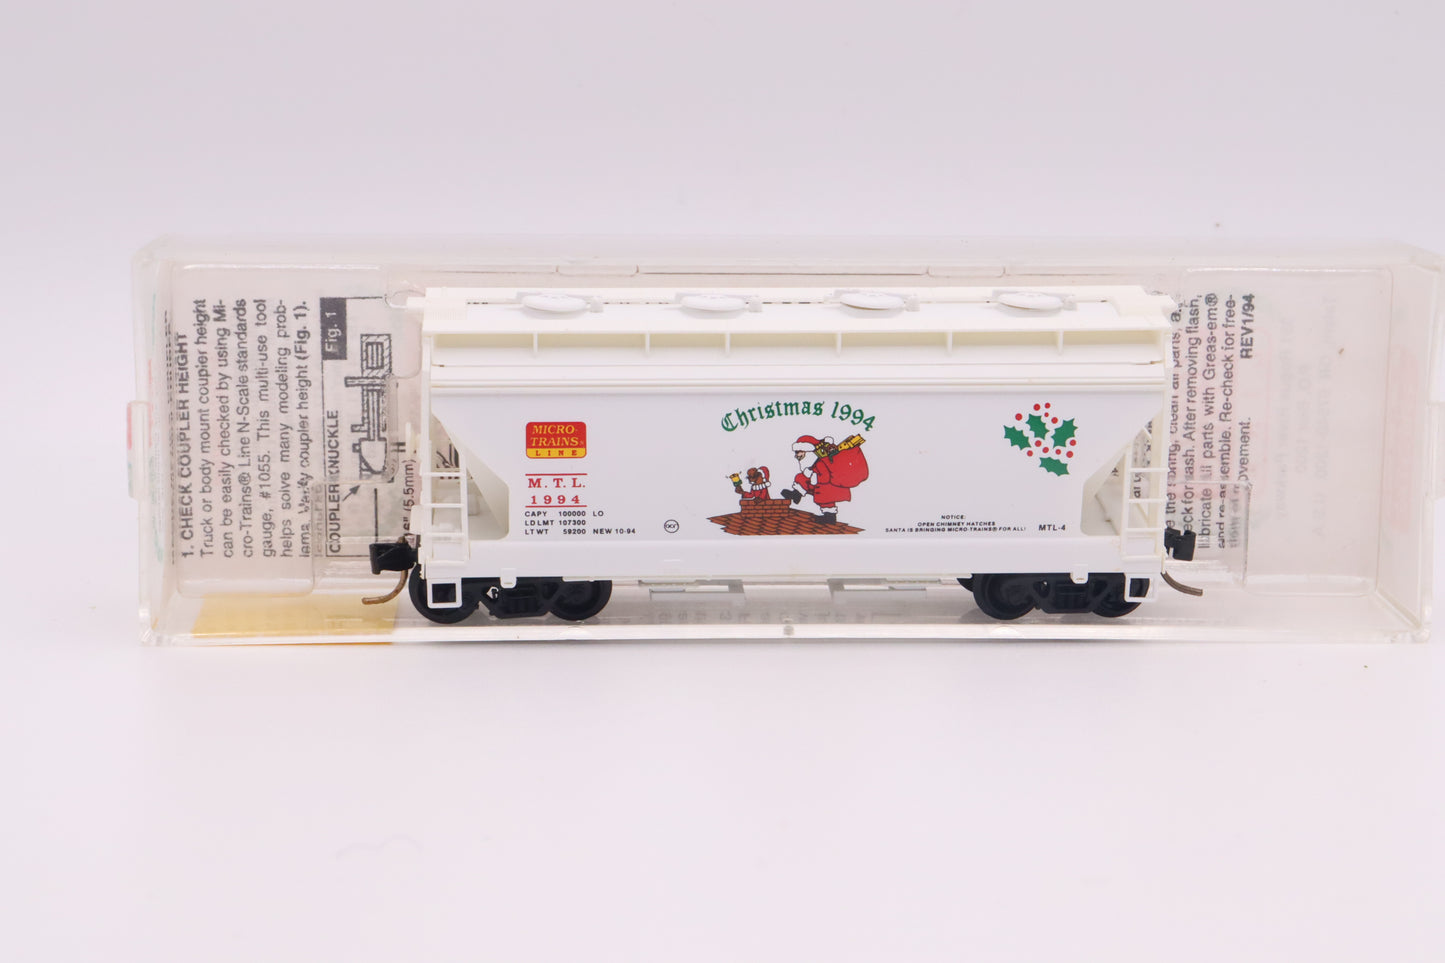 MTL-92060 - 2-Bay ACF Centerflow Covered Hopper w/ Round Hatches - Micro-Trains Holiday Car - MTL-1994